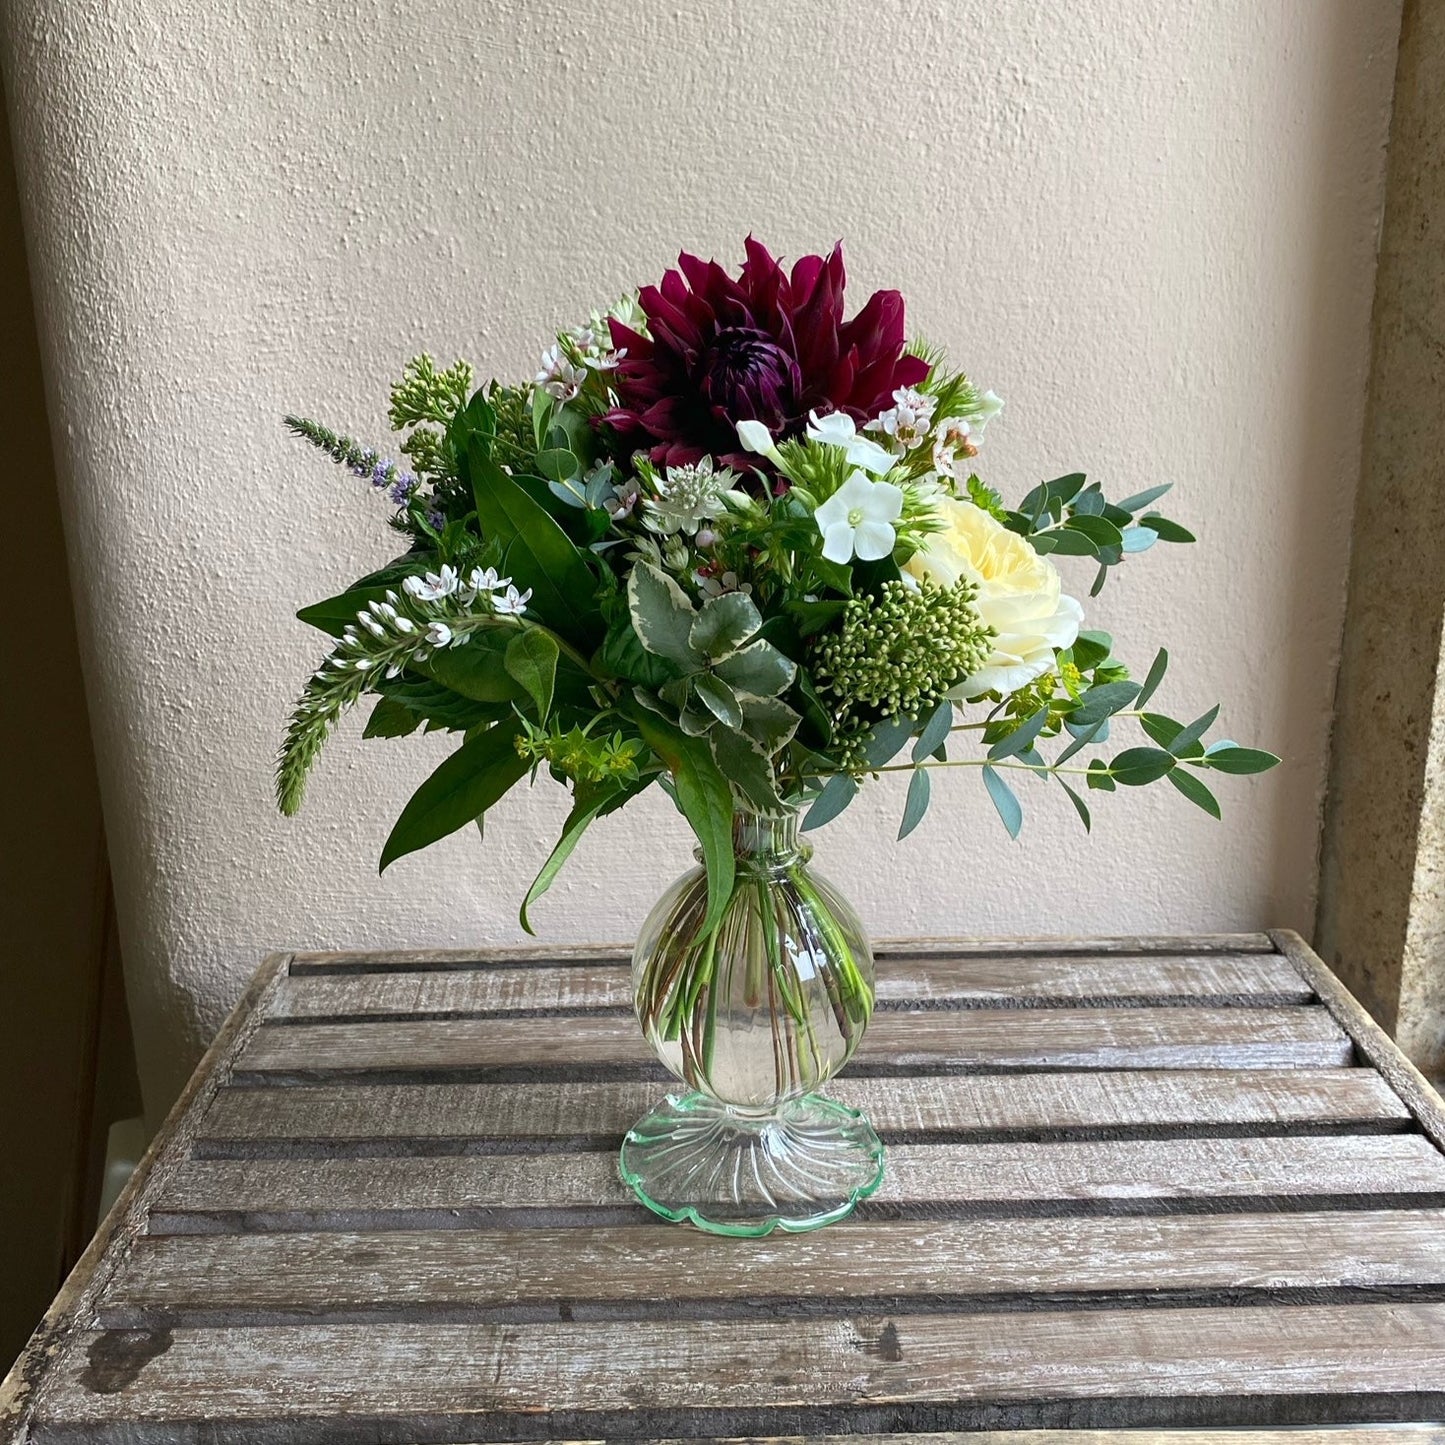 Delicate, Ruffled Glass Bud Vase with a Green Rim - including a posy of seasonal flowers